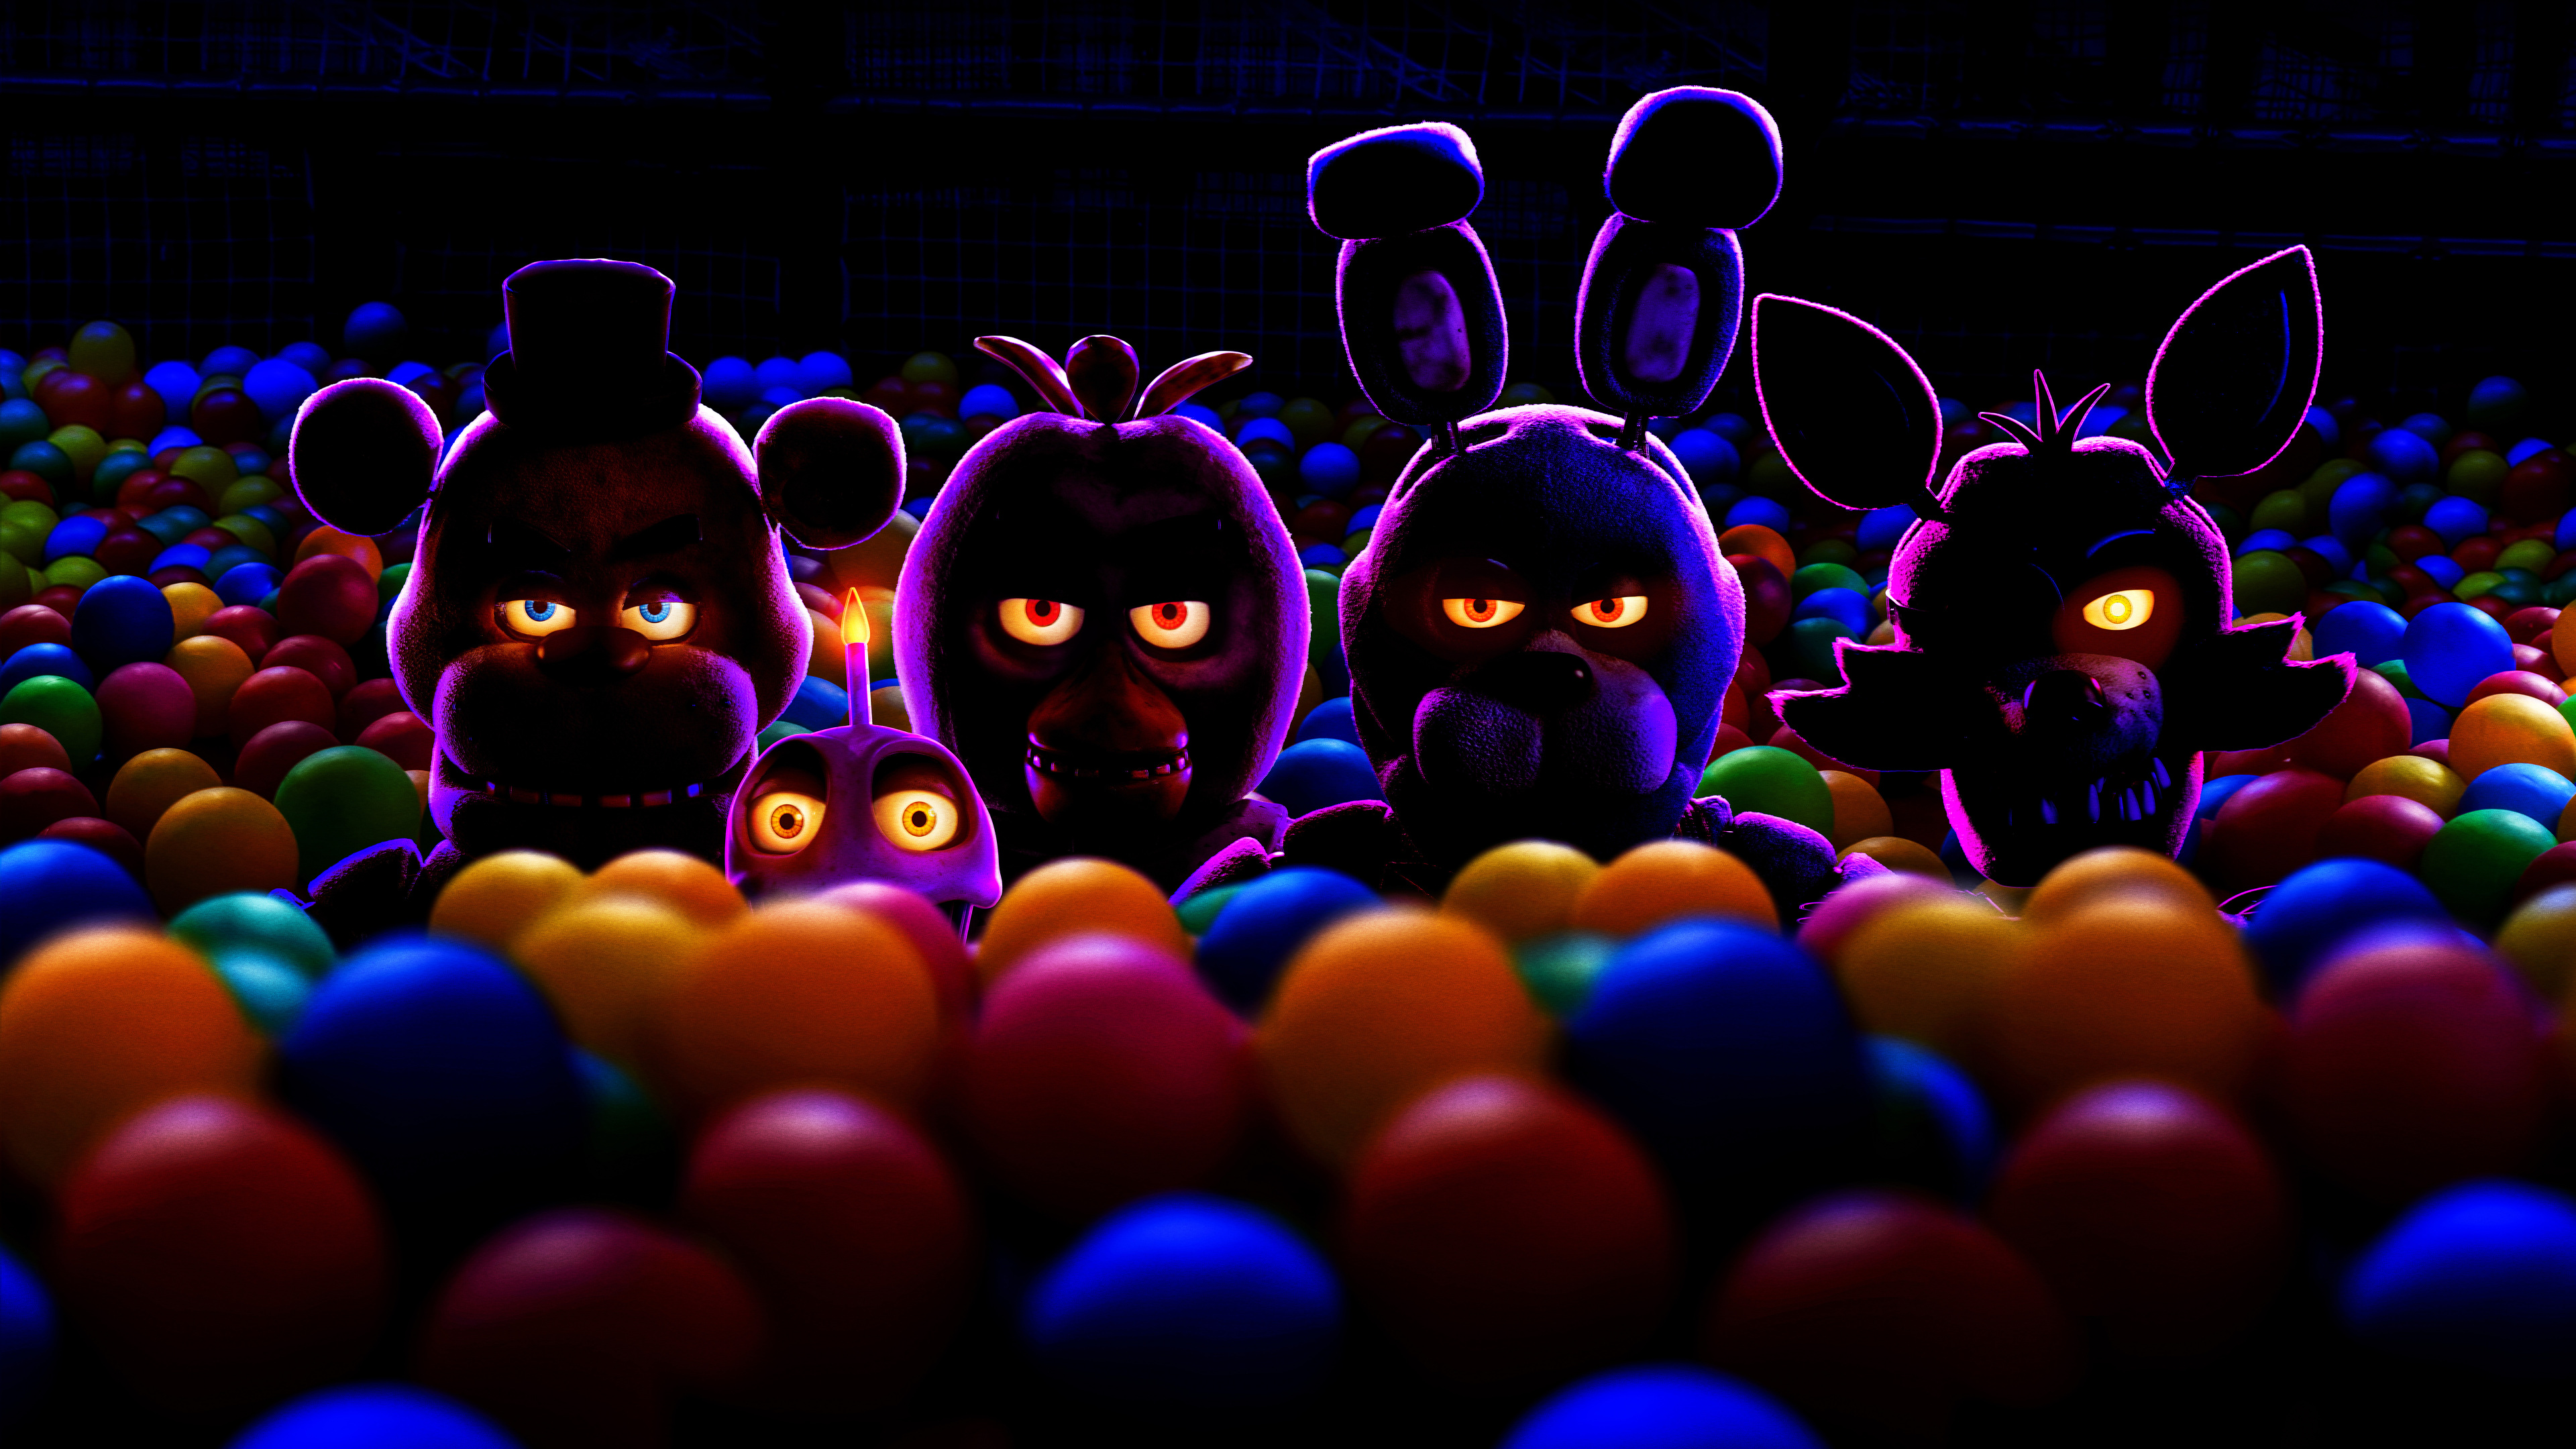 Five Nights At Freddys 12k Wallpaper In 3840x2160 Resolution